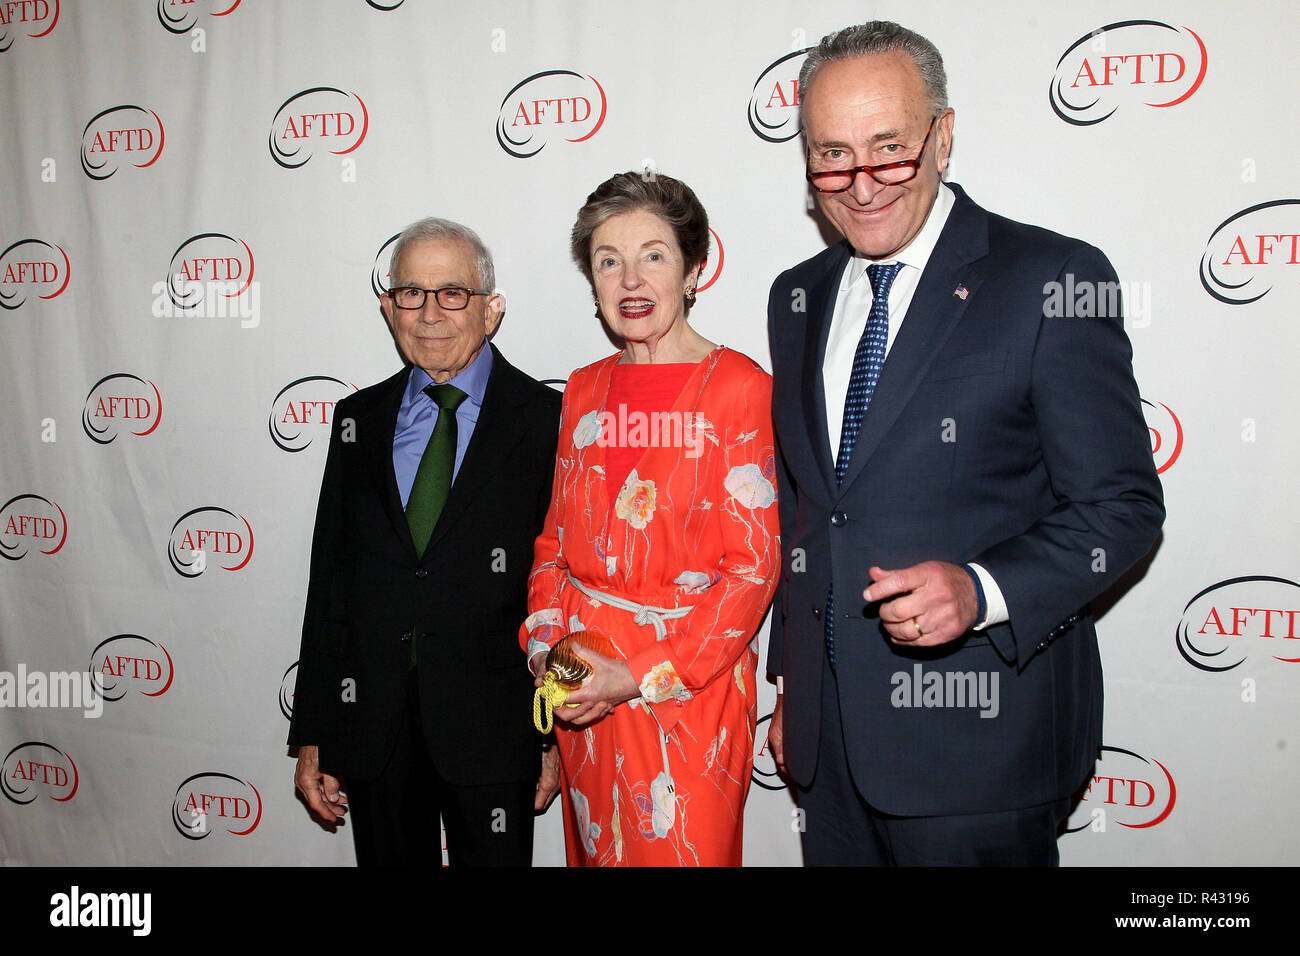 NEW YORK, NY - OCTOBER 12:  Owner, Advance Publications Donald Newhouse, Victoria Newhouse and Sen. Charles E. Schumer attend the 2017 AFTD Hope Rising Benefit at The Pierre Hotel on October 12, 2017 in New York City.  (Photo by Steve Mack/S.D. Mack Pictures) Stock Photo